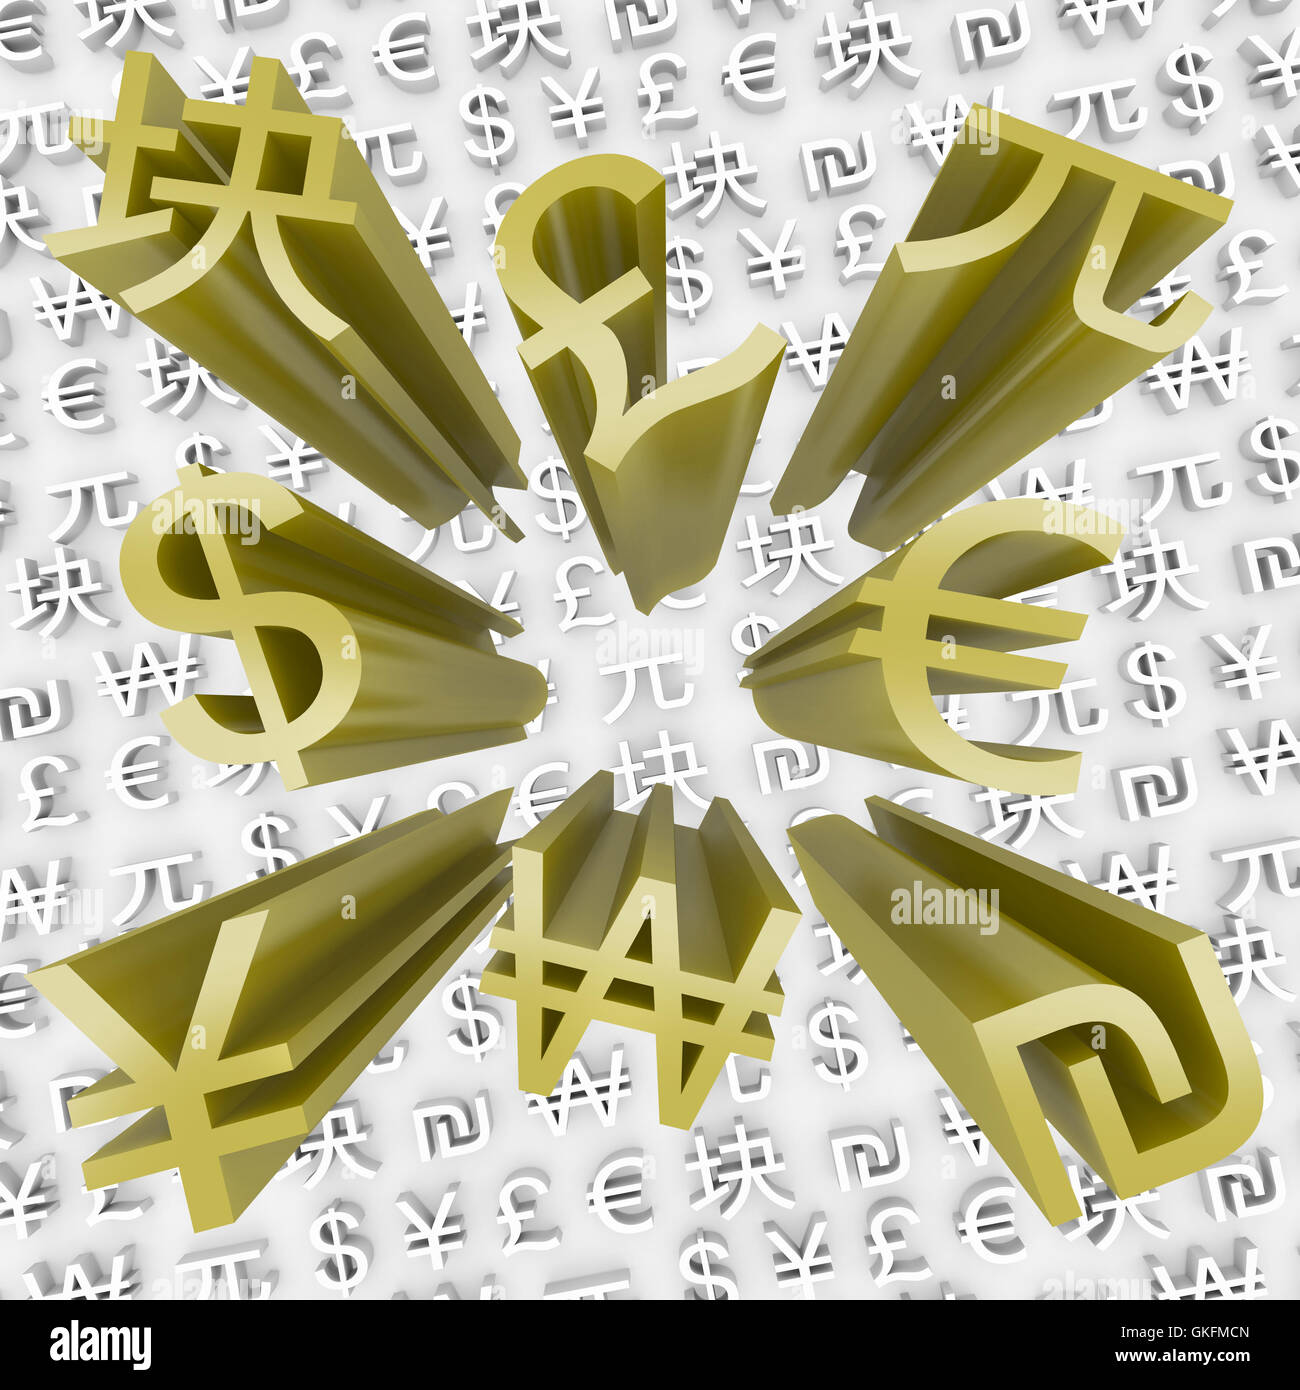 Gold Currency Symbols Fly Out of Money Background Stock Photo